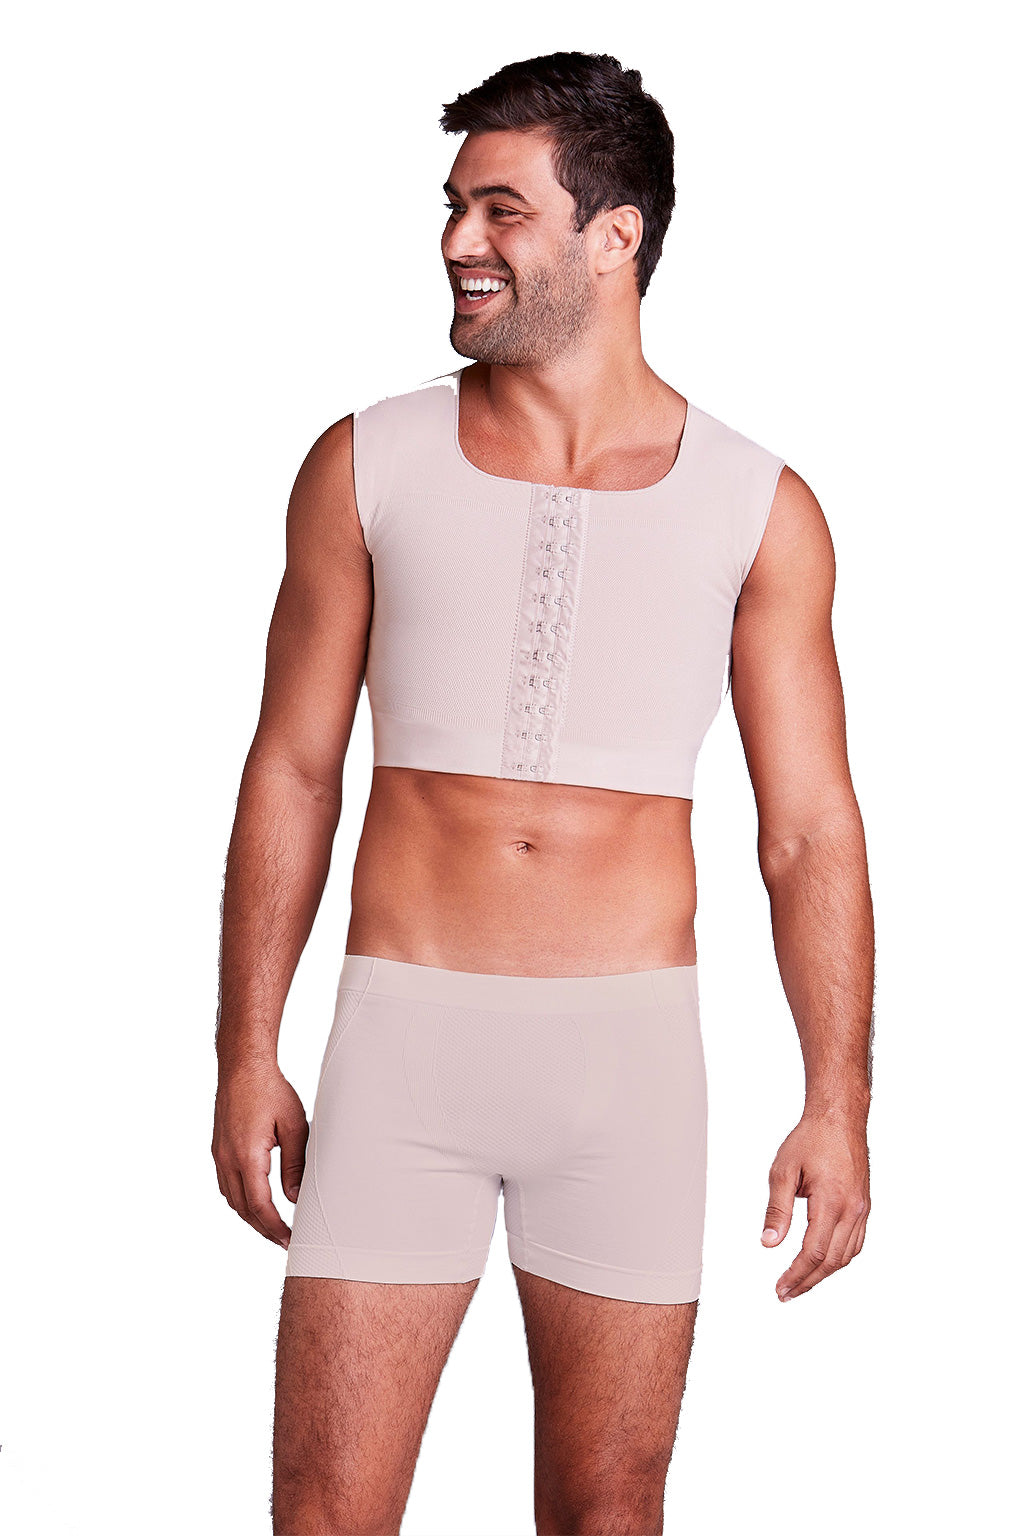 Post-surgery top Compression Chest Shapewear for Men